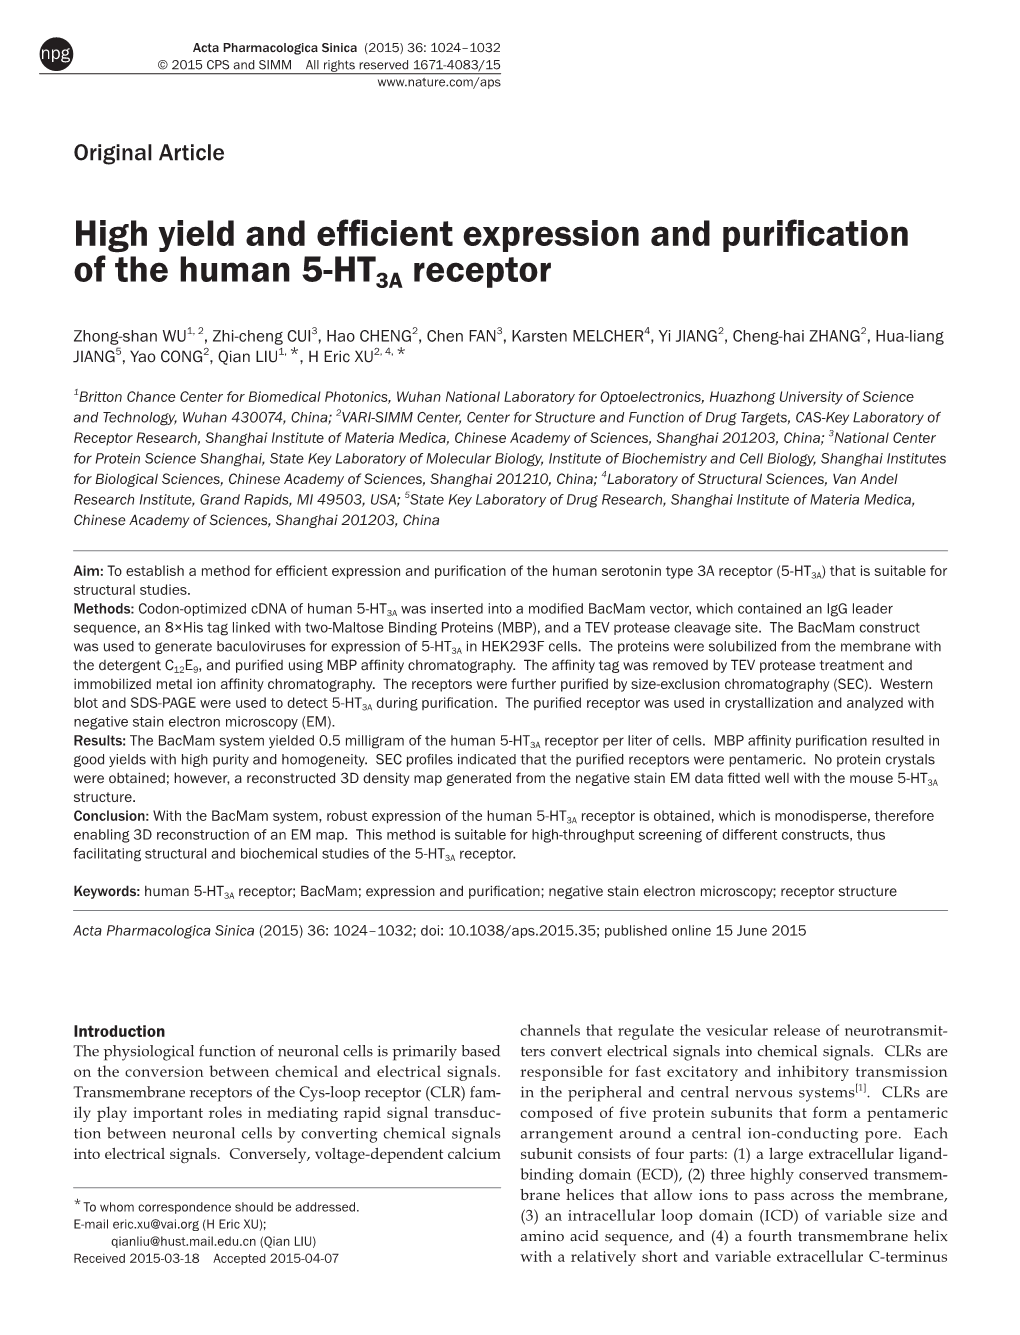 High Yield and Efficient Expression and Purification of the Human 5-HT3A Receptor